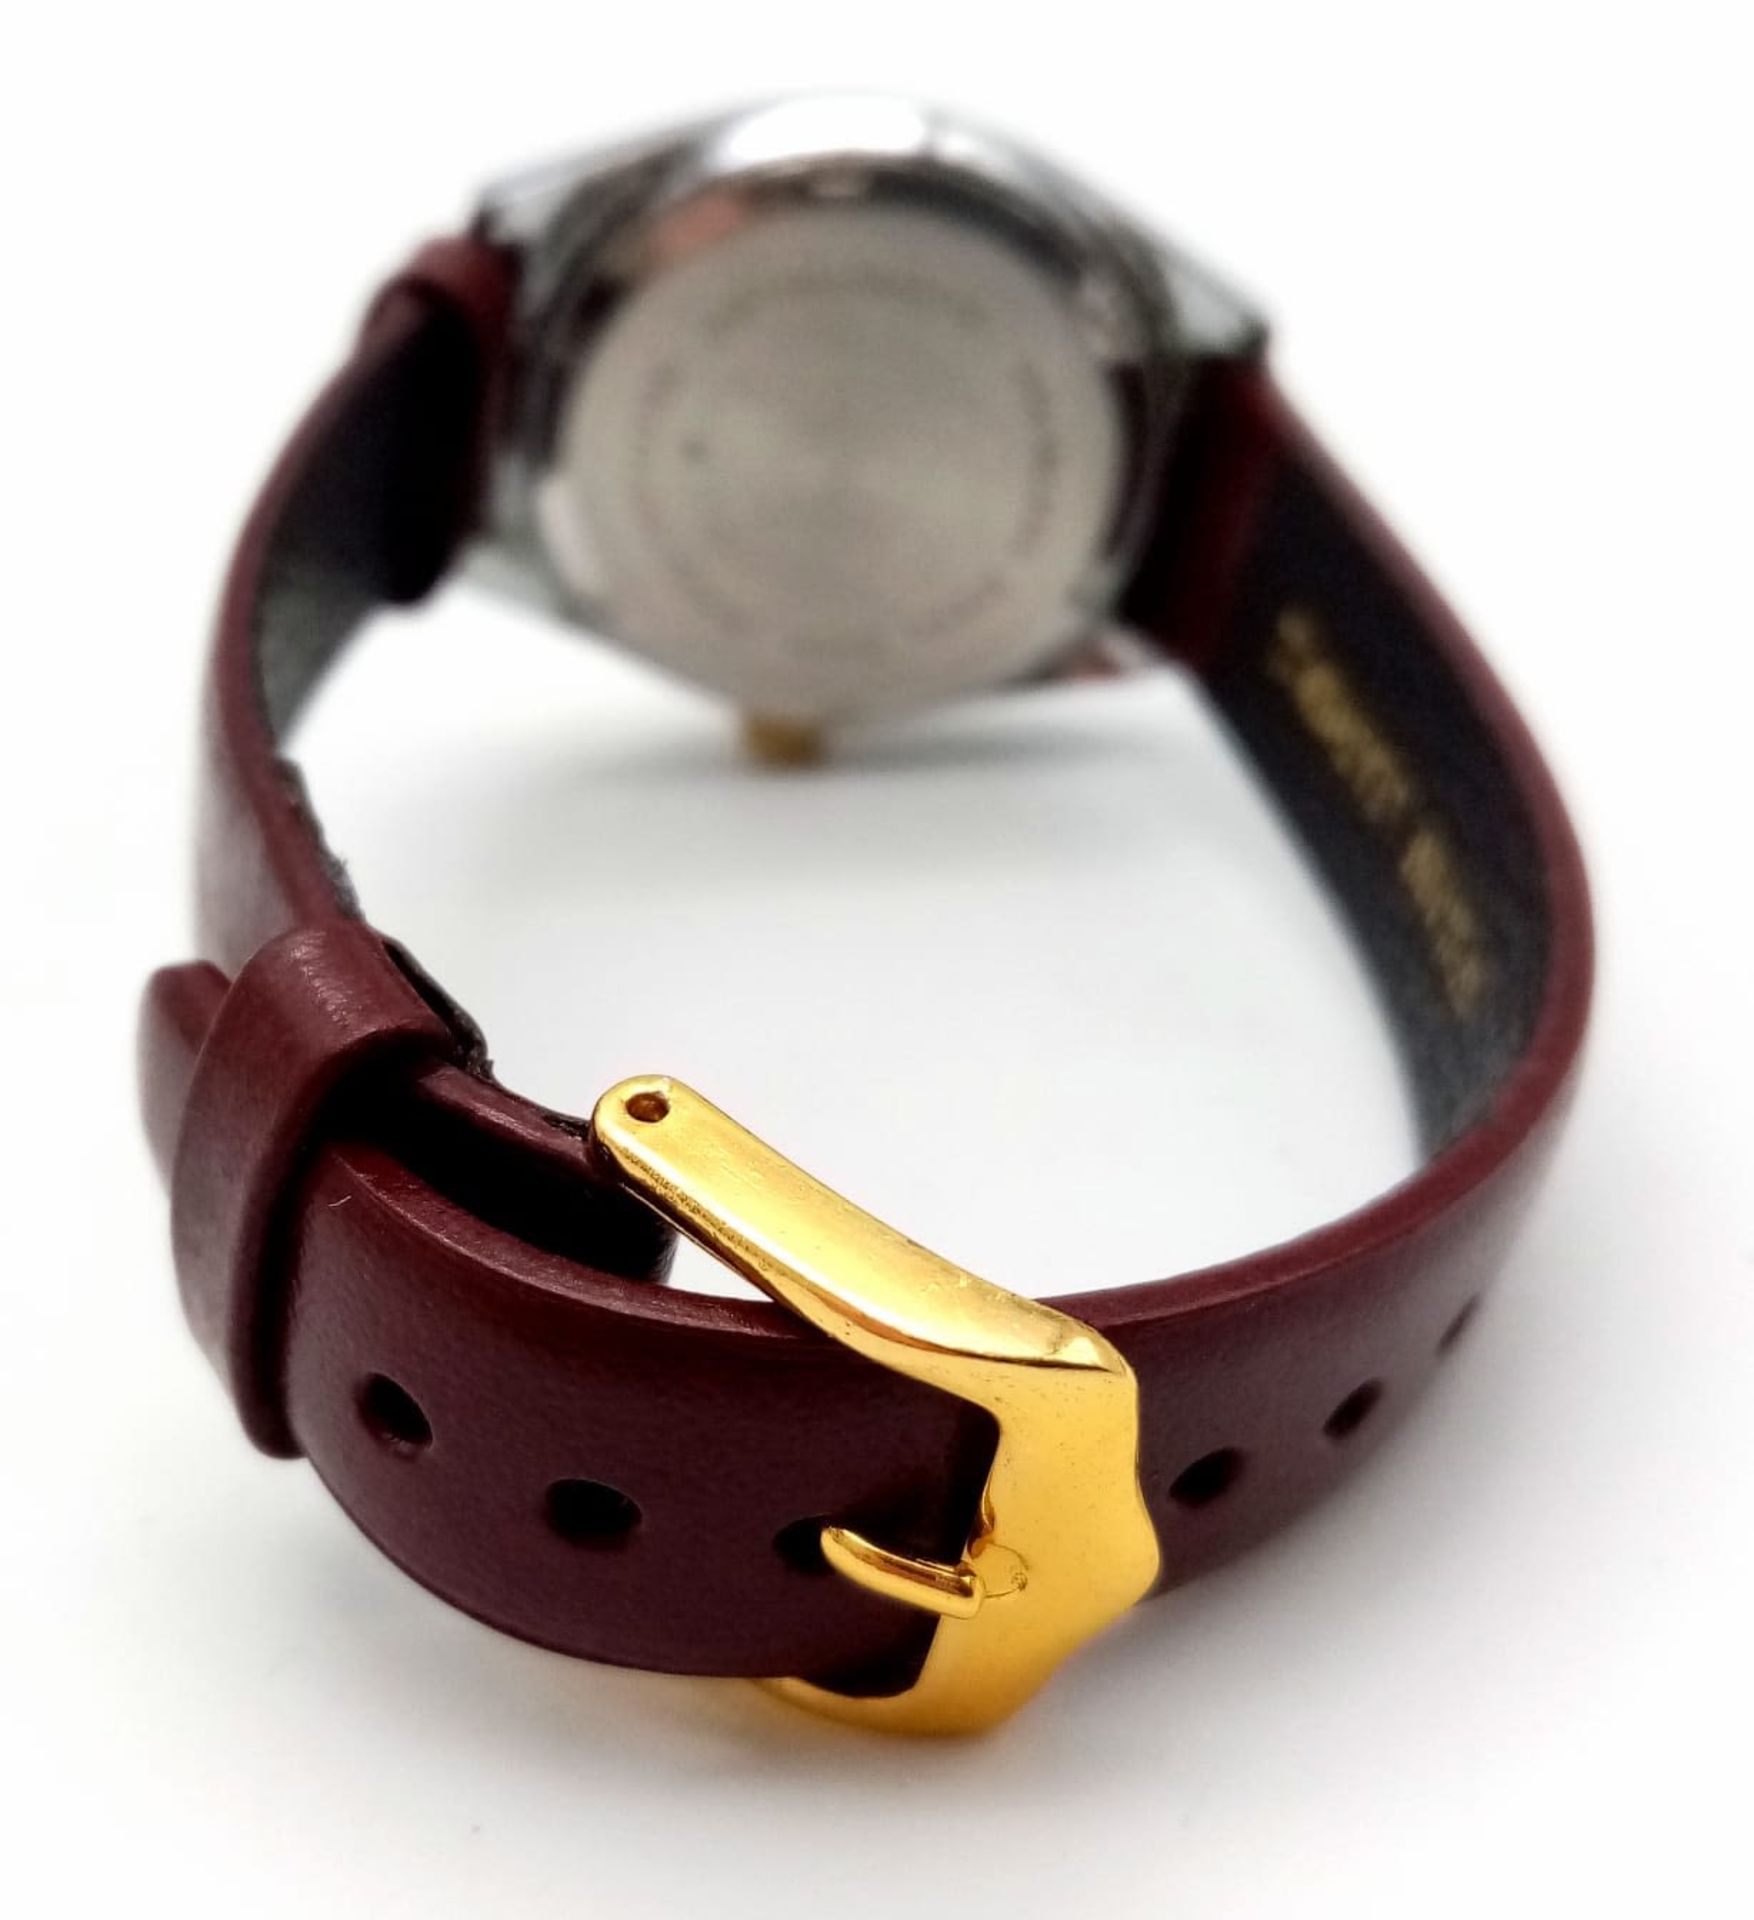 A Vintage Remex De Luxe Automatic Gents Watch. Burgundy leather strap. Stainless steel case - - Image 7 of 12